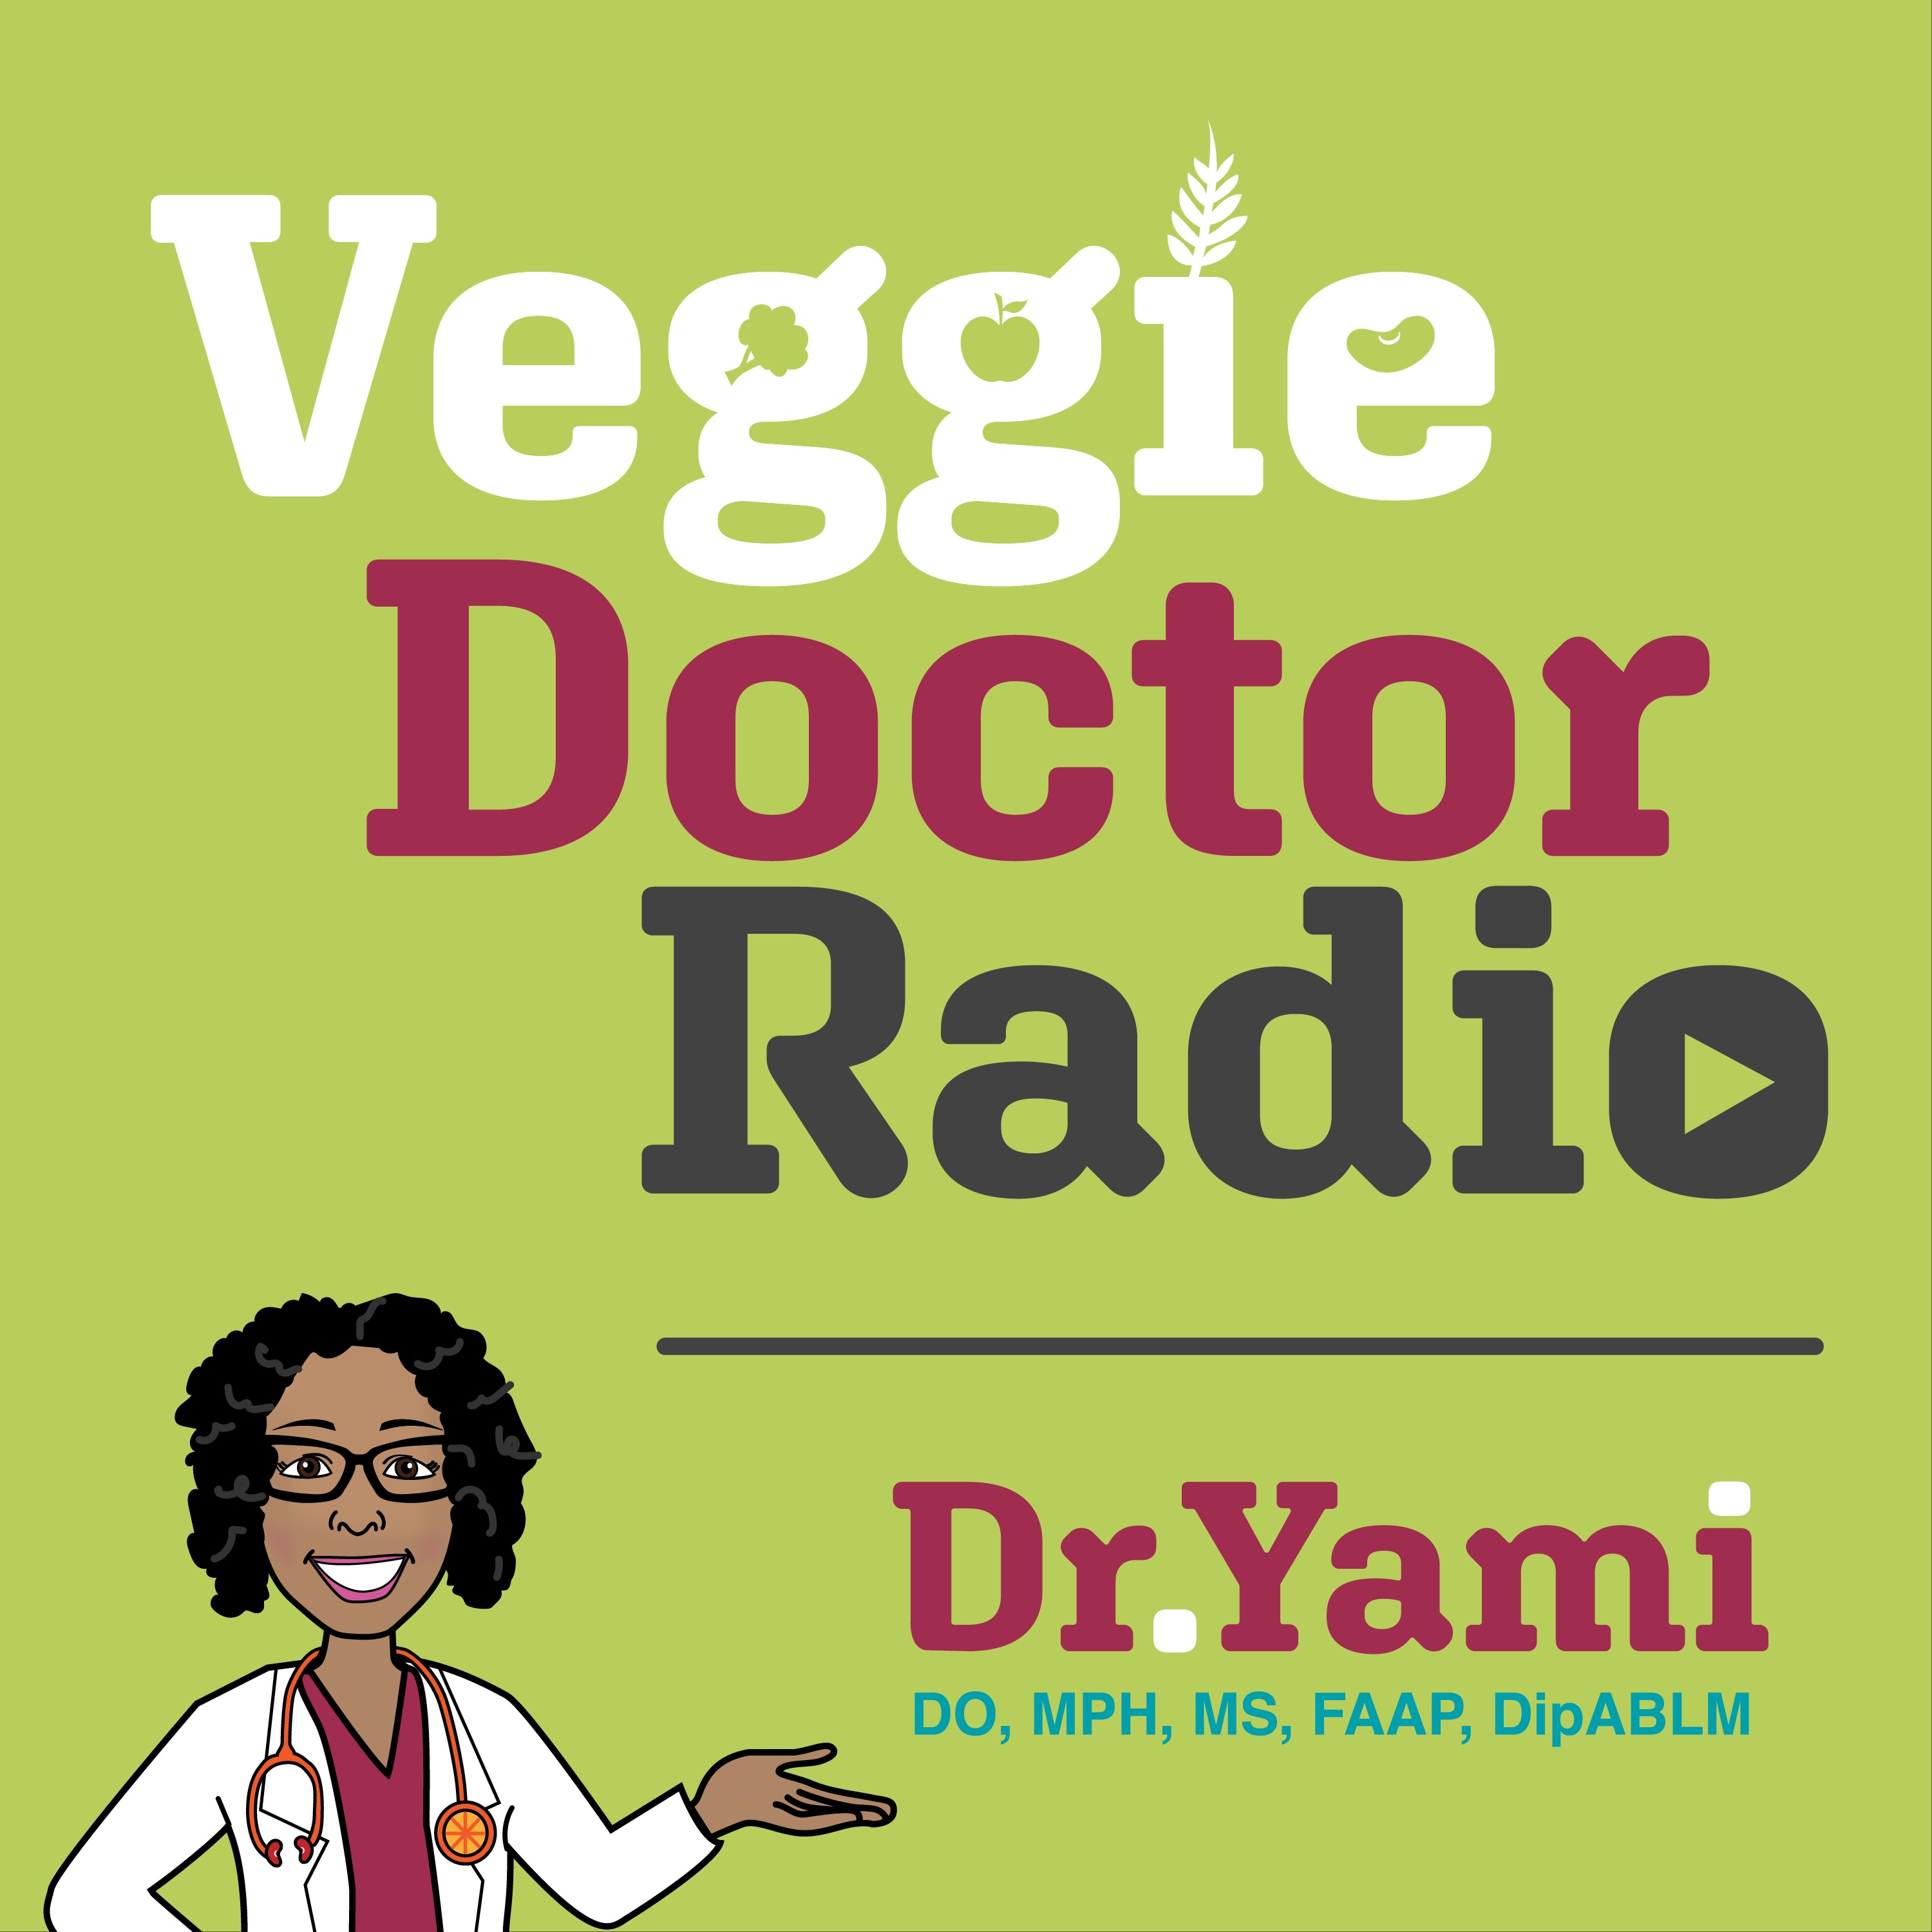 136: Building a Plant-Based and Wellness-Focused Community with Dr. Riz and Maya of PlantBased DFW (Veggie Doctor Radio)